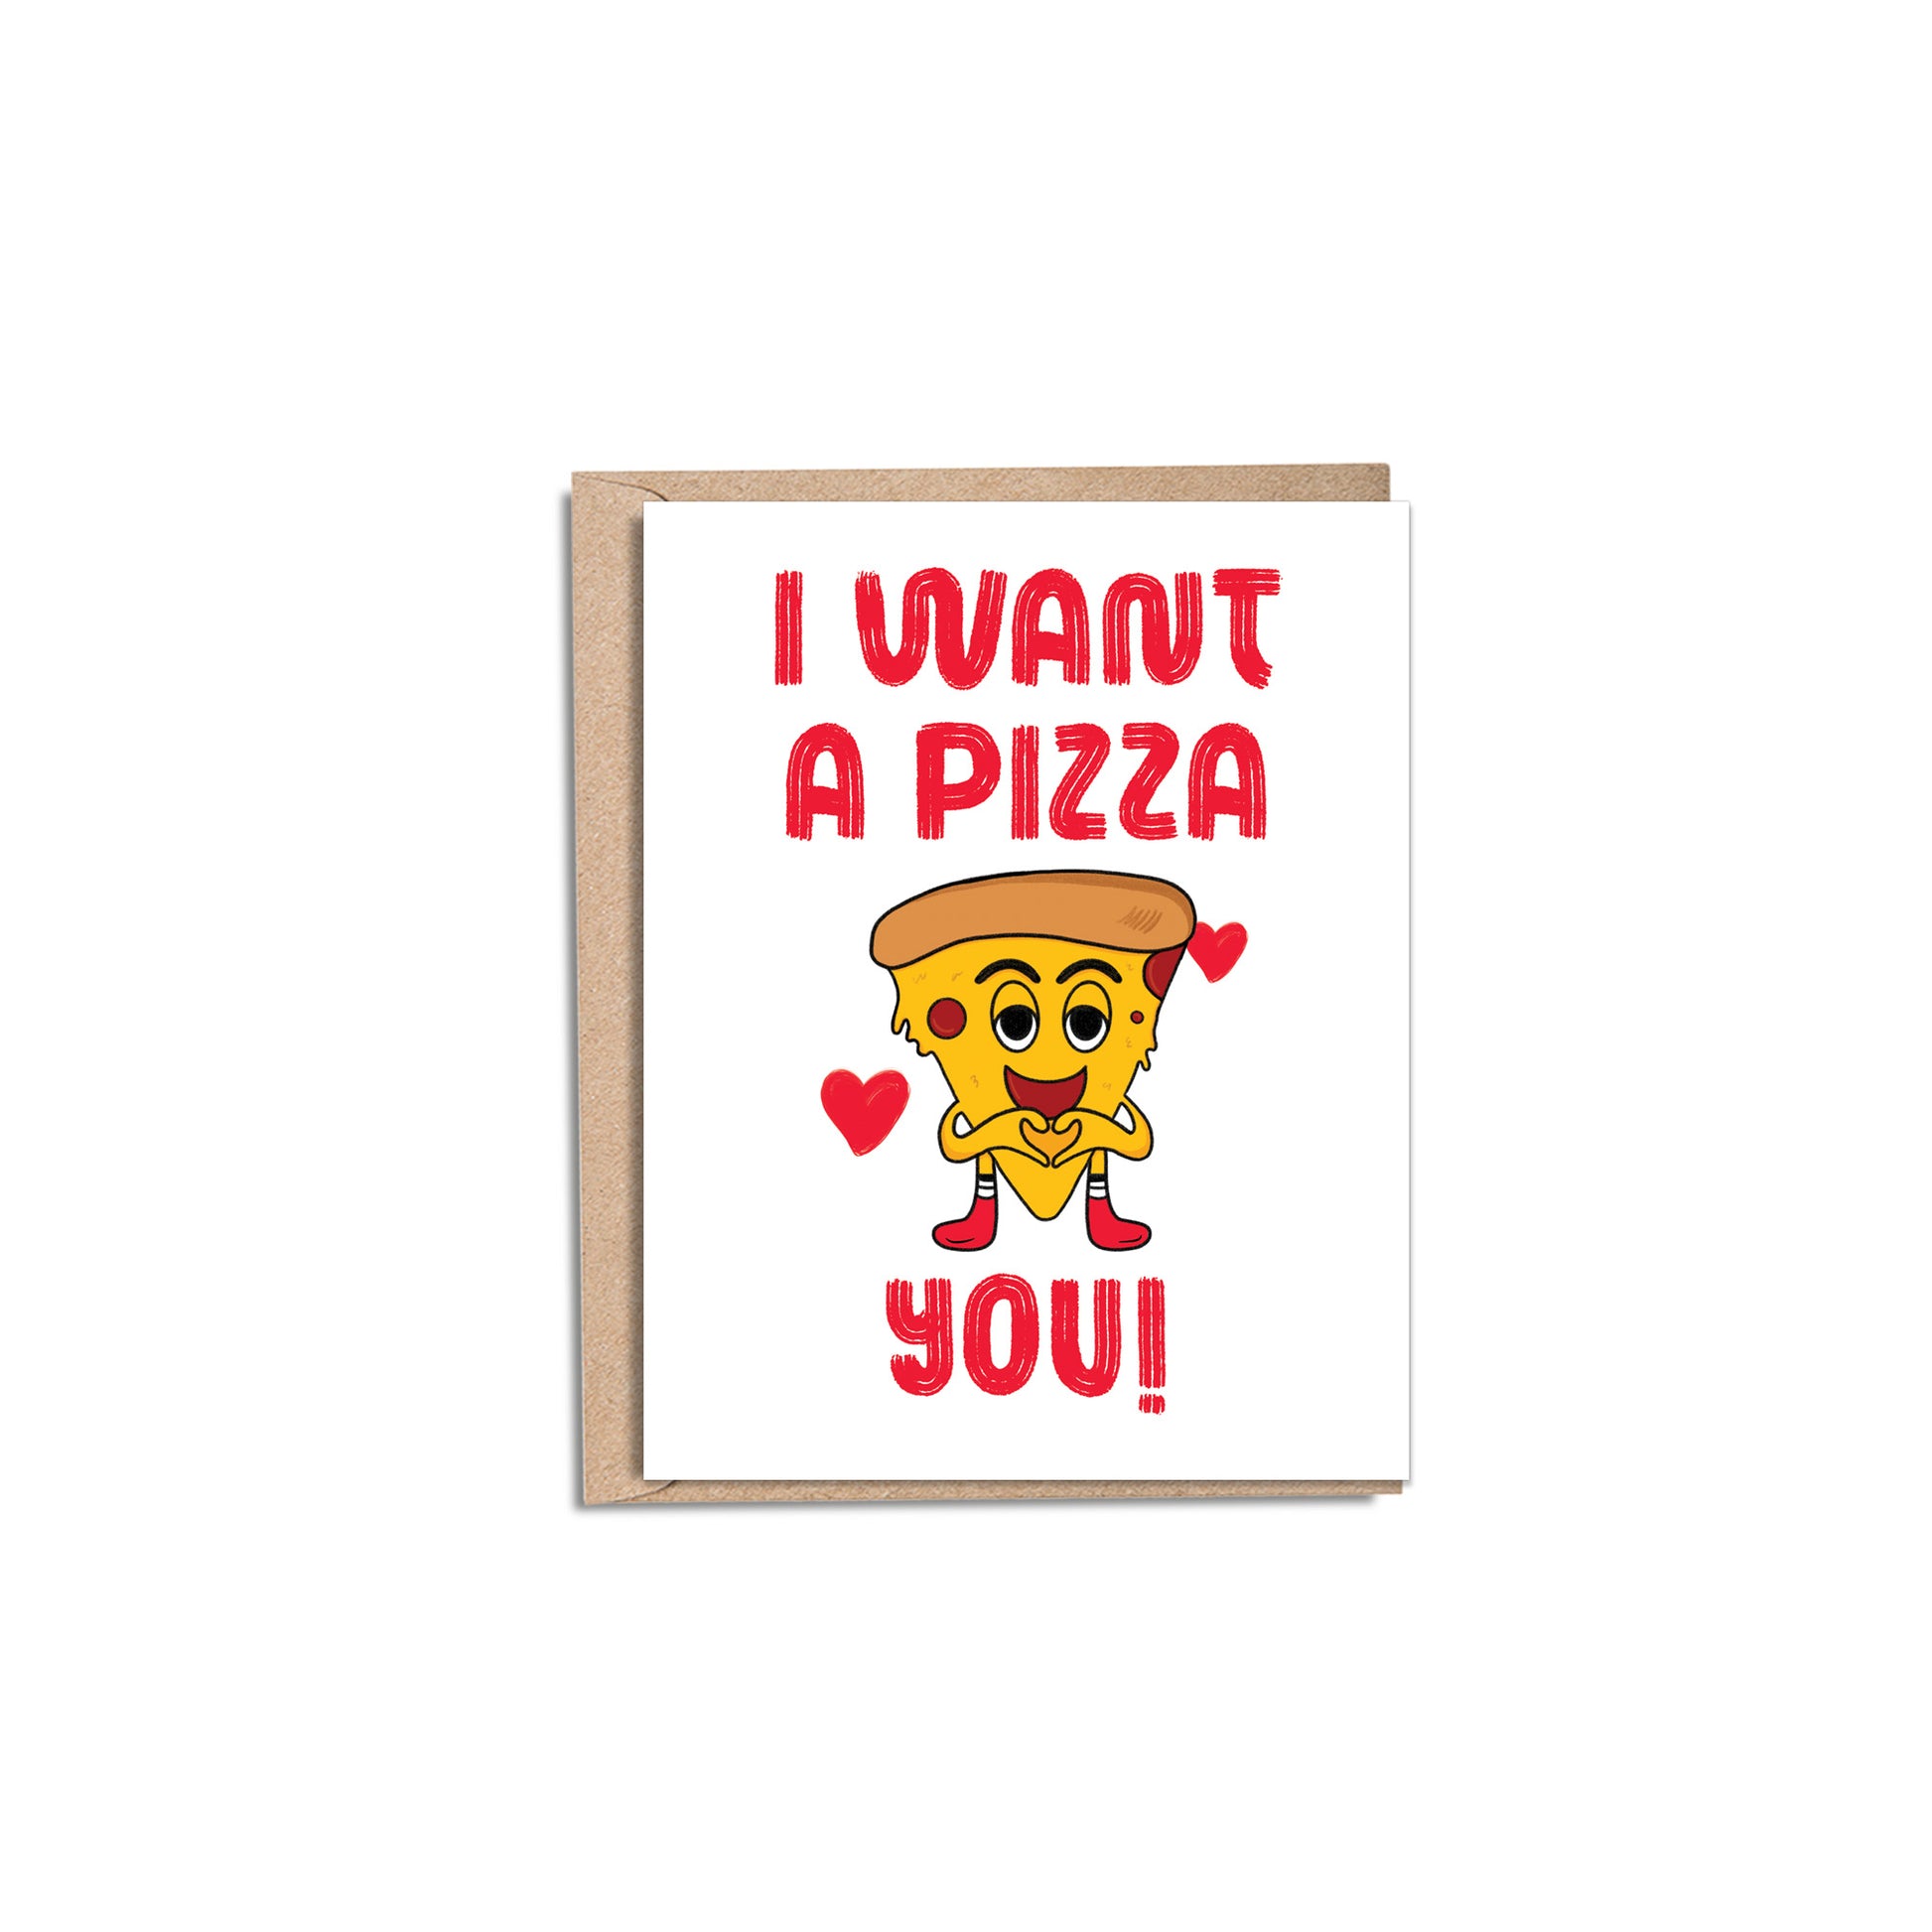 4.25 x 5.5” A2 sized card with an illustration of a pepperoni pizza with red mschf boots making a heart hand gesture. The text on the card reads ‘I Want a Pizza You’ in red. The inside of the card is blank. Envelope included.